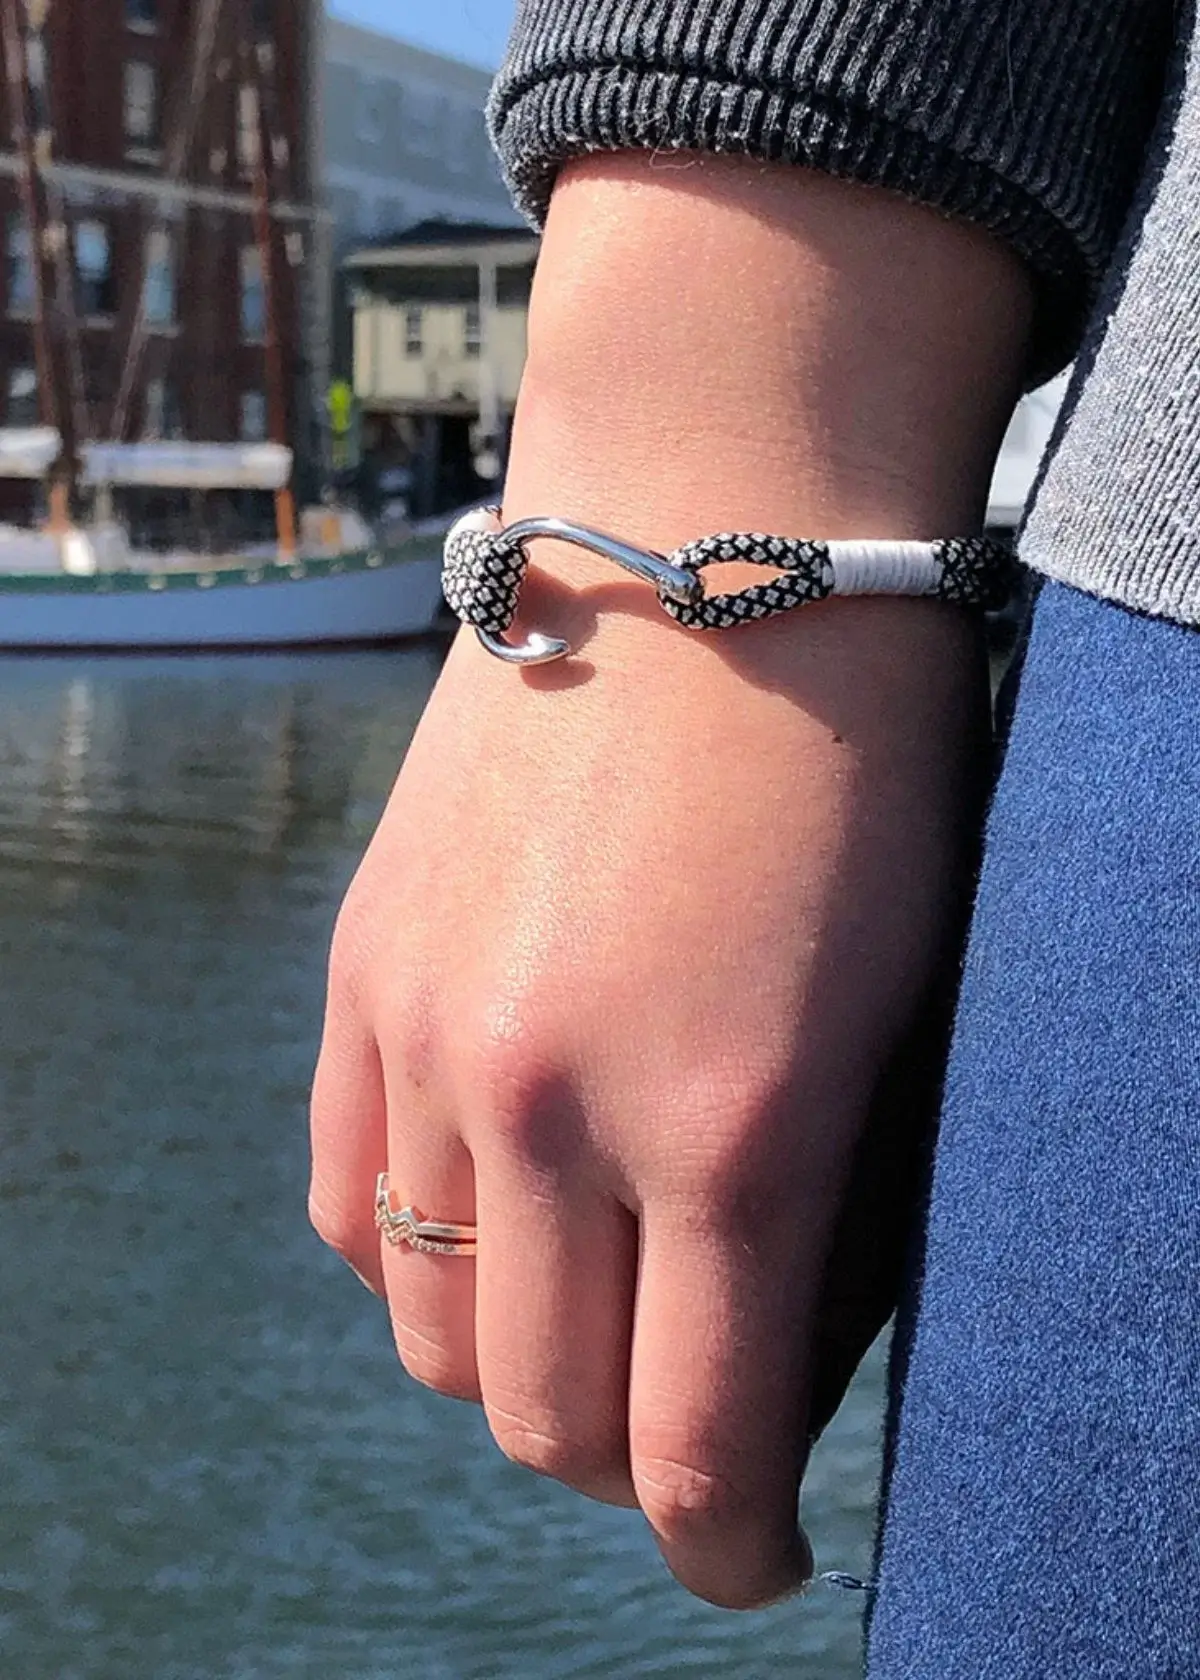 How to Choose the Right Fish Hook Bracelet?